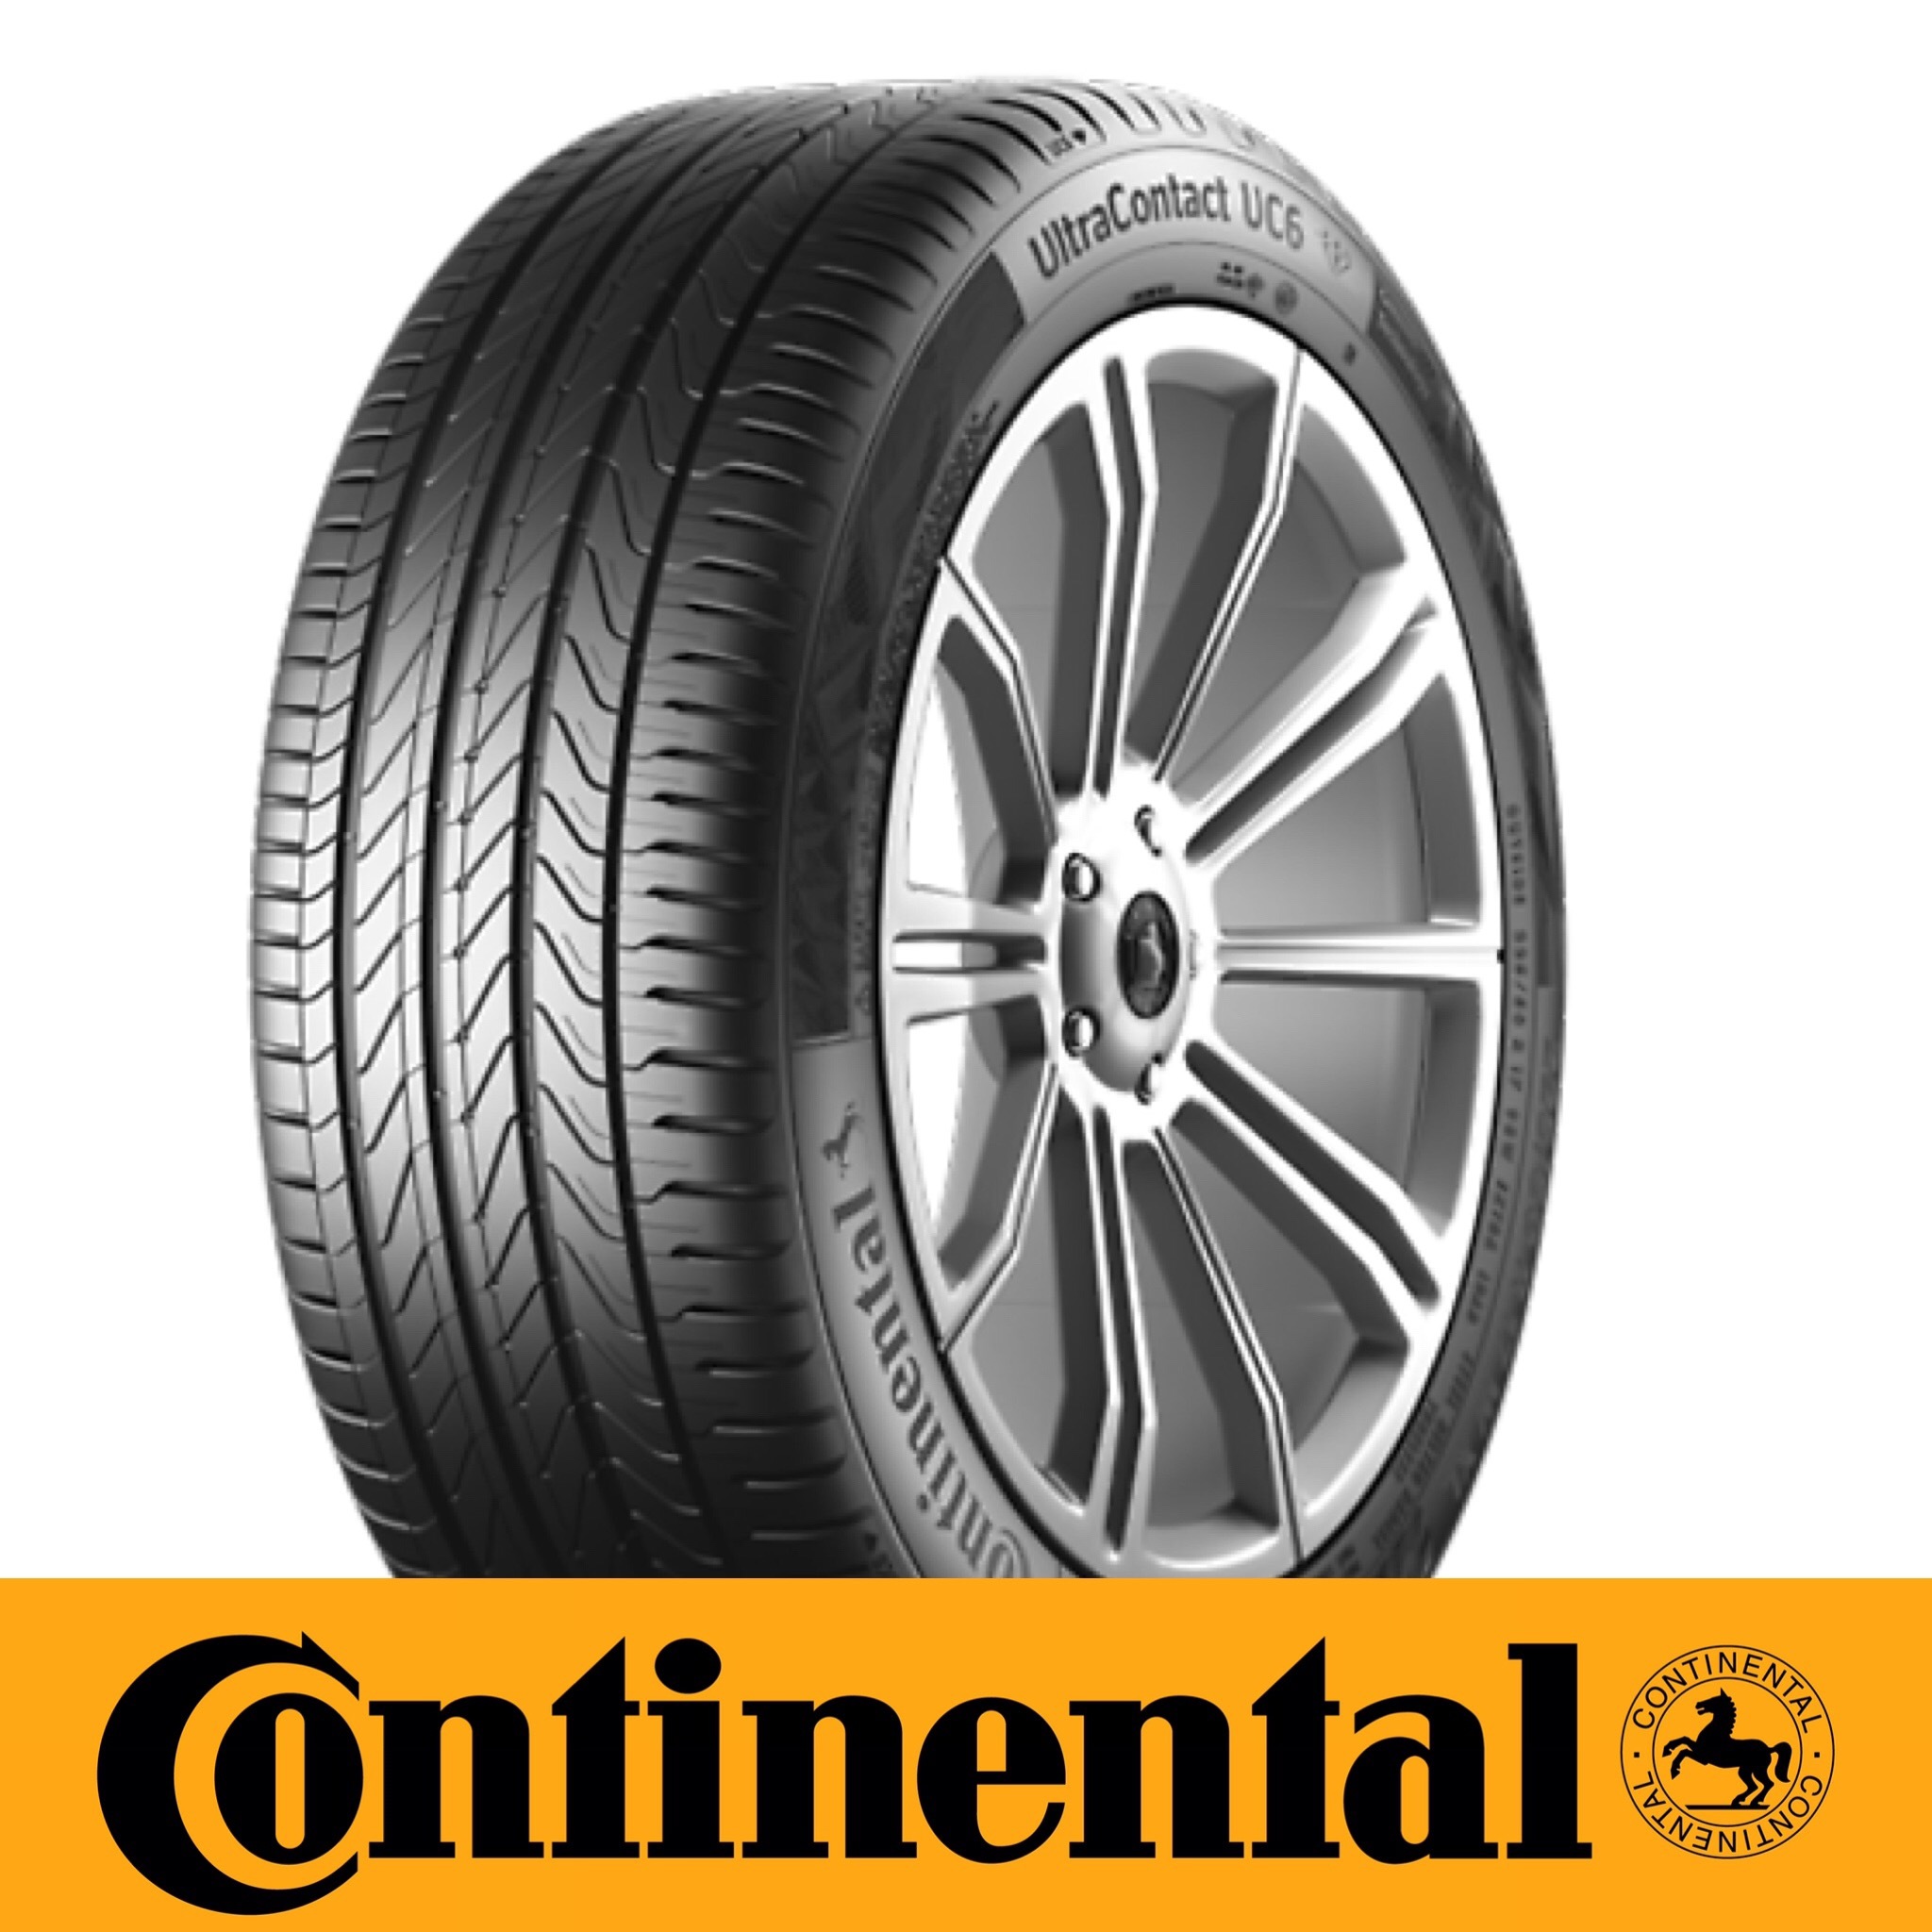 Continental-UltraContact-175-65R17-87H-(b)